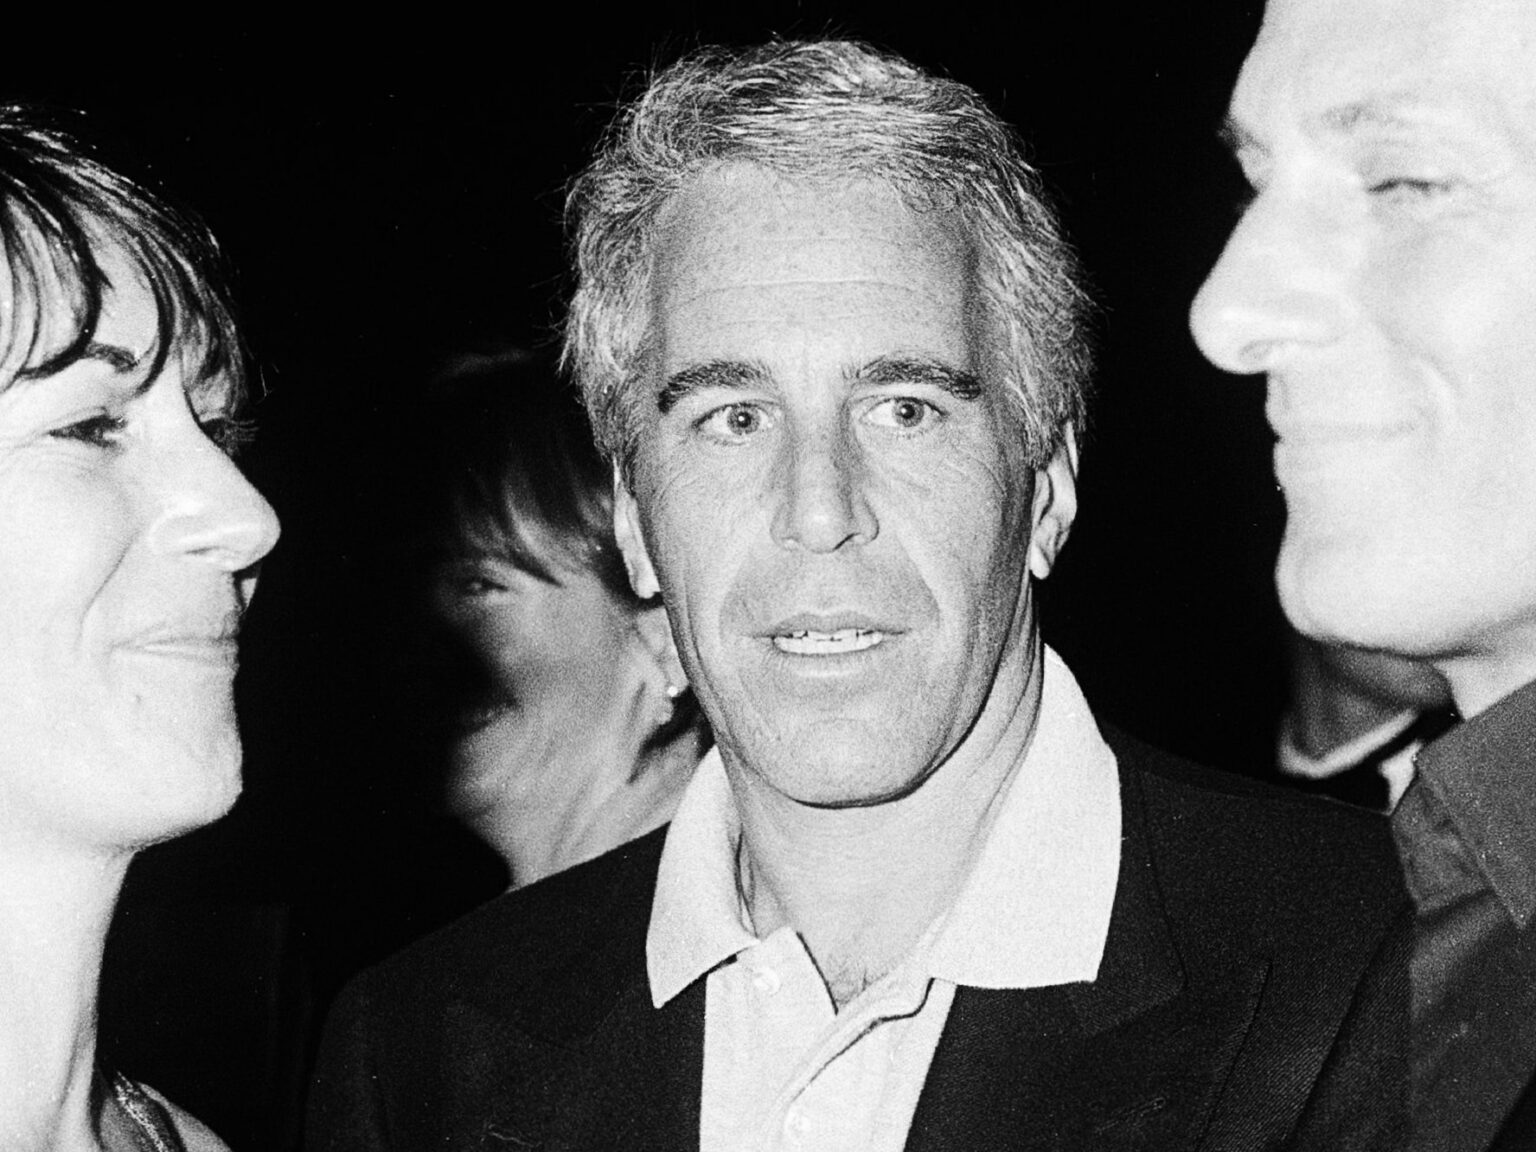 The scope & breadth of Jeffrey Epstein’s sexual abuse horrors have sunken to new depths. Did Epstein force young victims into marriages?